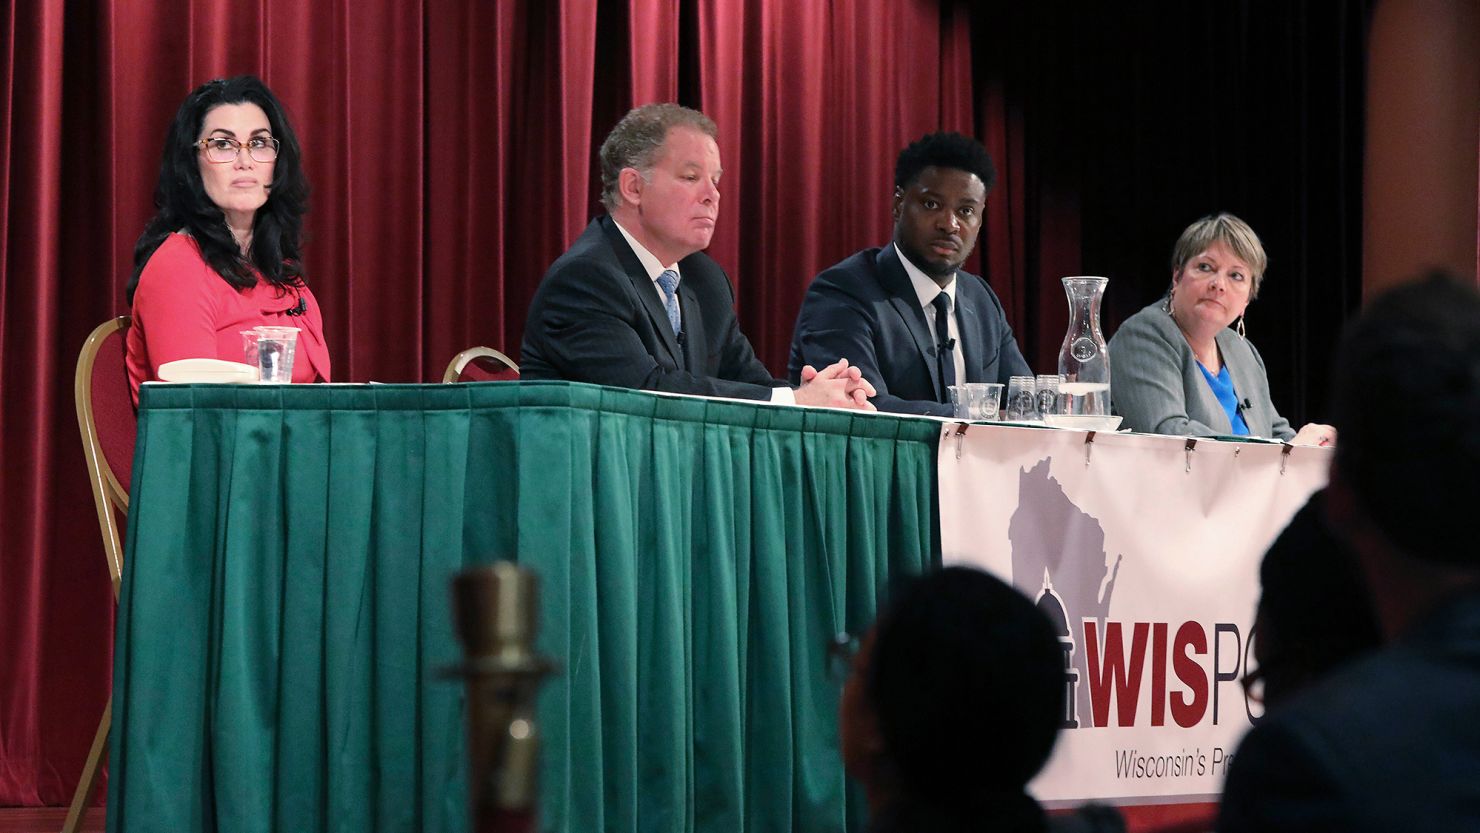 Wisconsin Supreme Court candidates, from left, Jennifer Dorow, Daniel Kelly, Everett Mitchell and Janet Protasiewicz participate in a candidate forum in Madison on January 9, 2023.